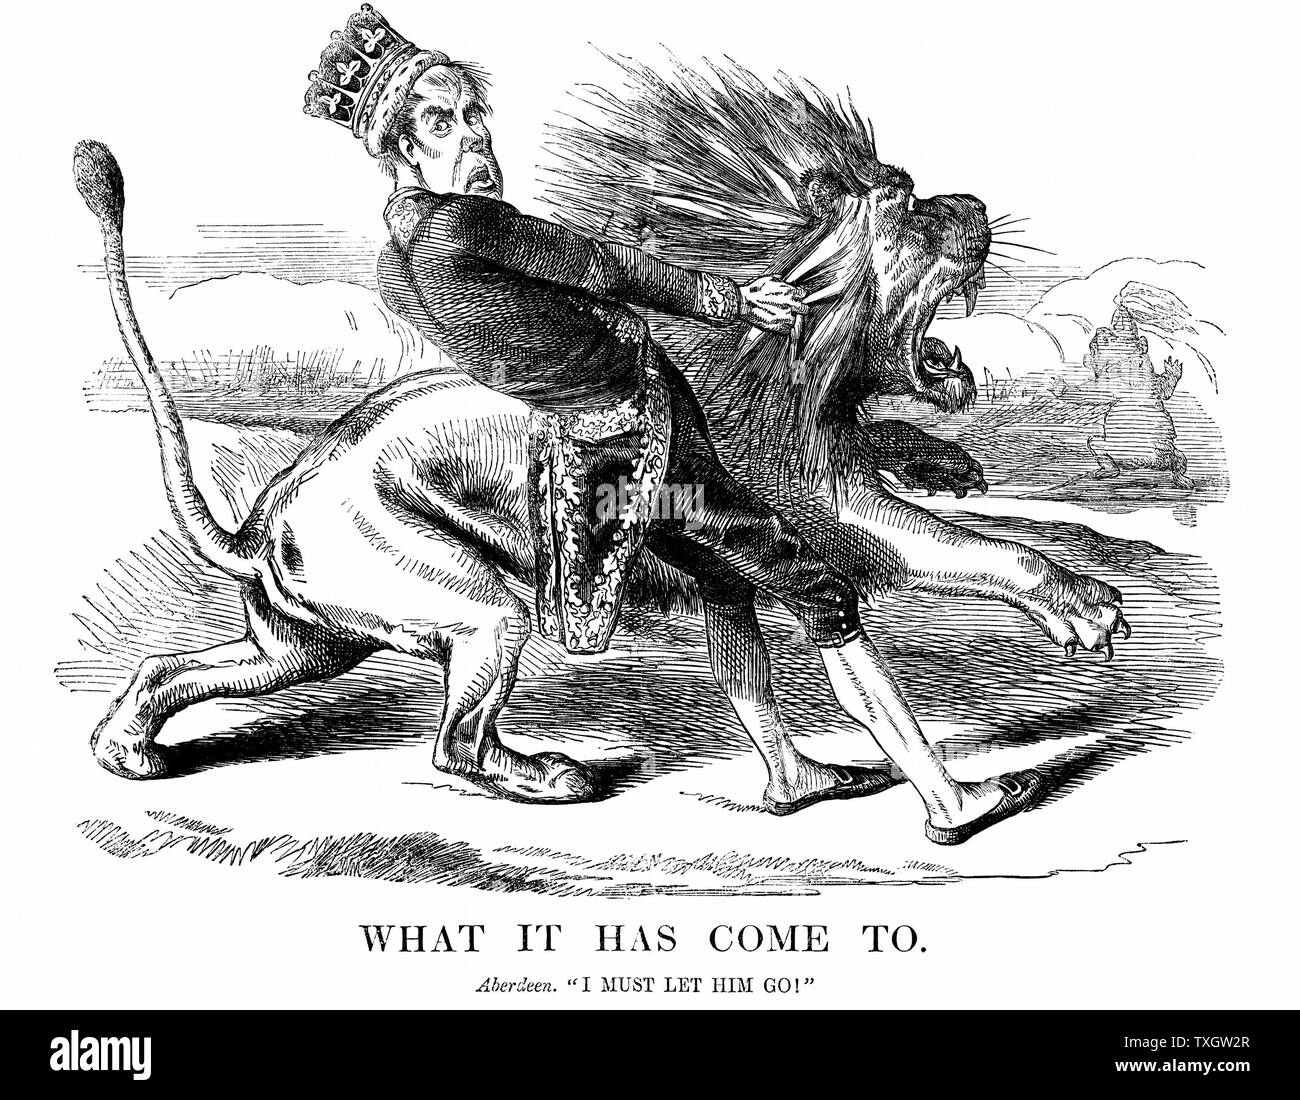 George Hamilton Gordon, 4th Earl of Aberdeen (1784-1860). Scottish statesman: British Prime Minister 1852-55. Reluctantly took Britain into Crimean War. 'Punch' cartoon of February 1854 showing him unable to restrain the British lion from chasing after the Russian bear Wood engraving Stock Photo